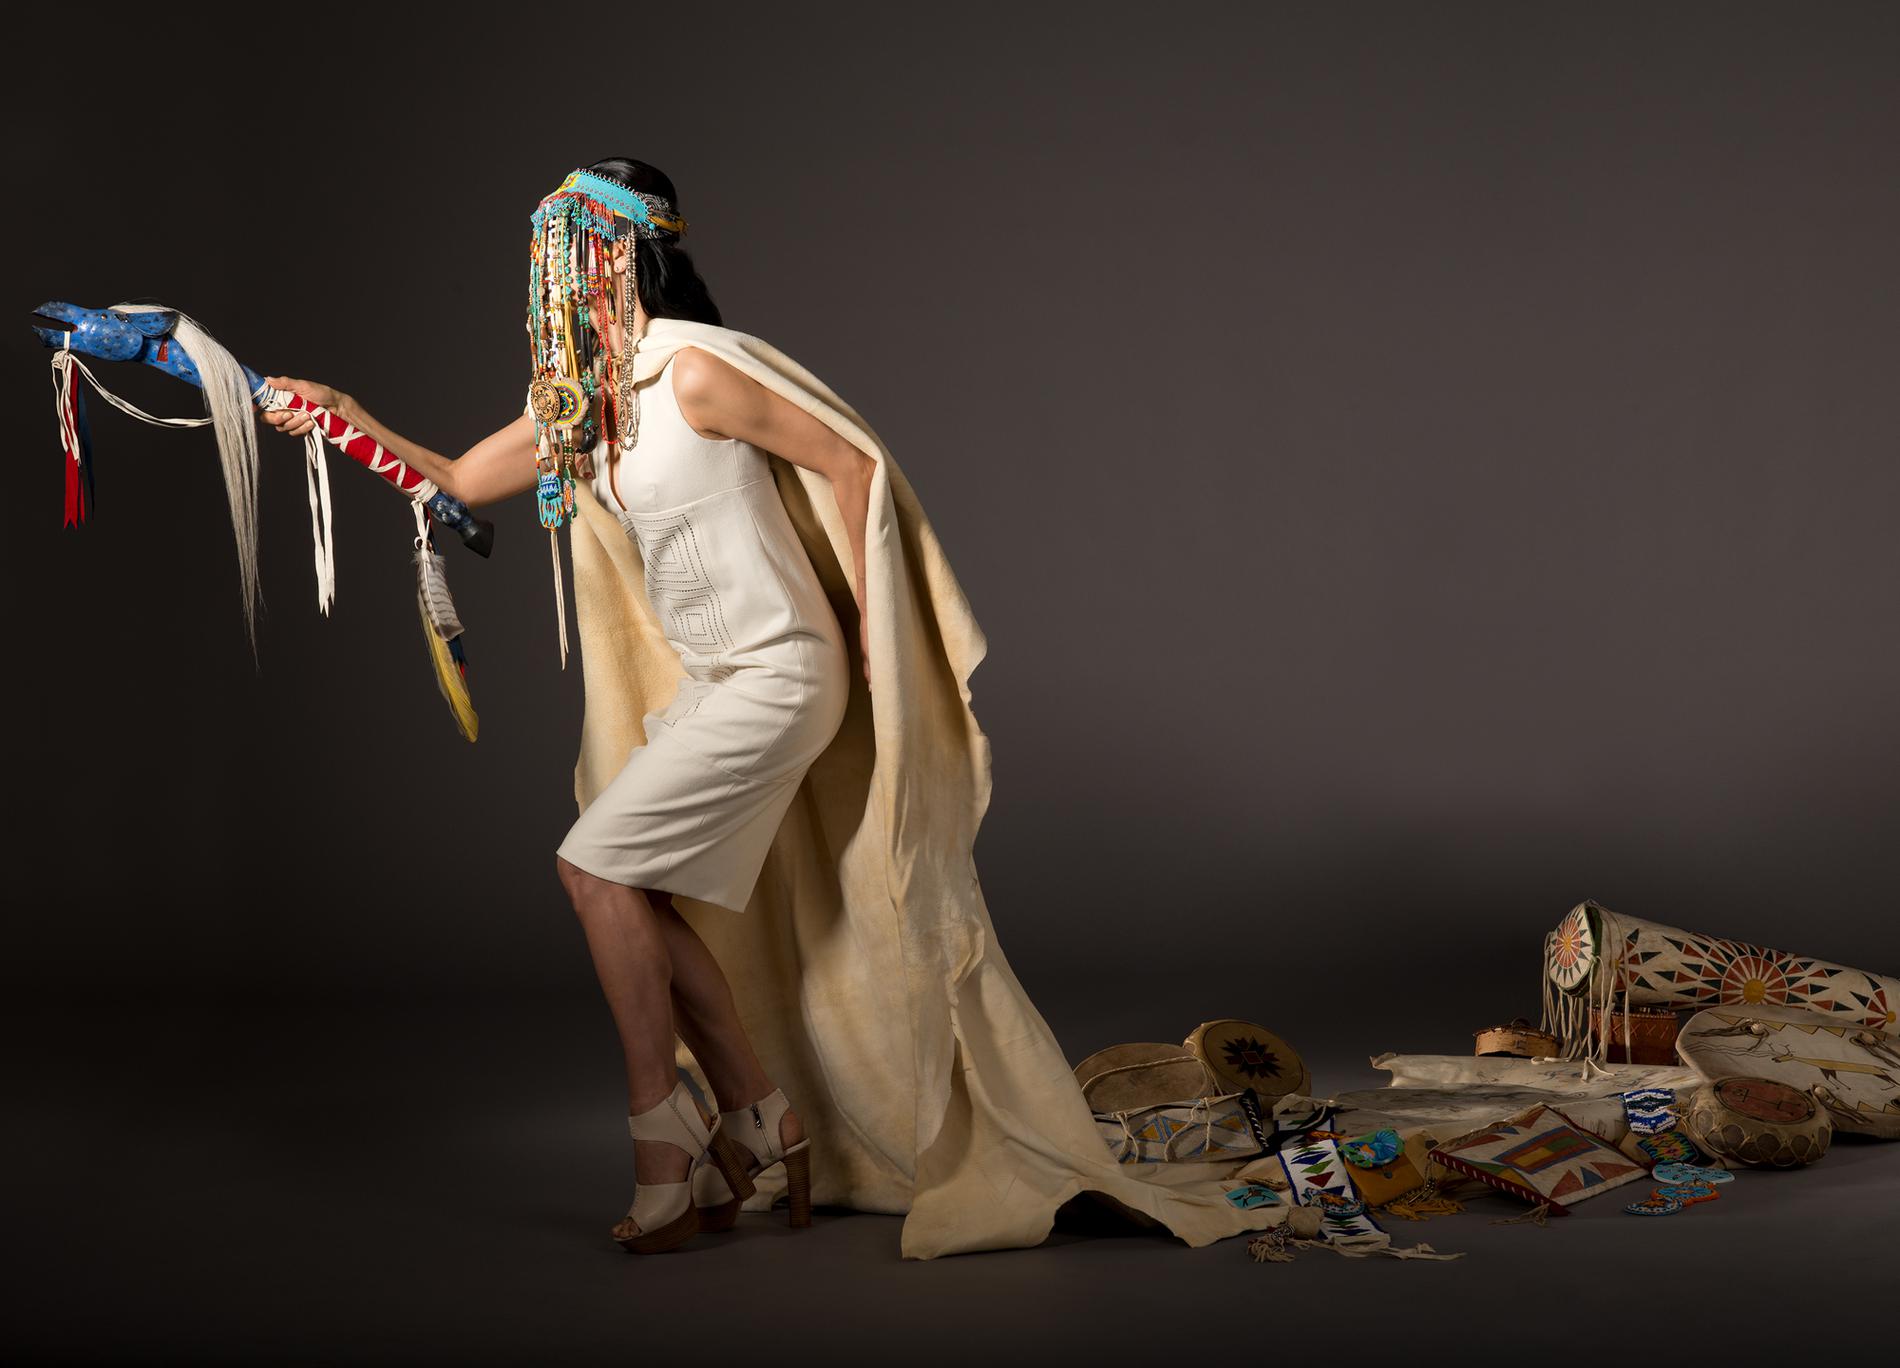 Indigenous woman with veiled beaded headdress and cape walks forward, carrying a multi-colourred staff with her arm outstretched, leaving a trail of Indigenous artifacts trailing on the floor behind her